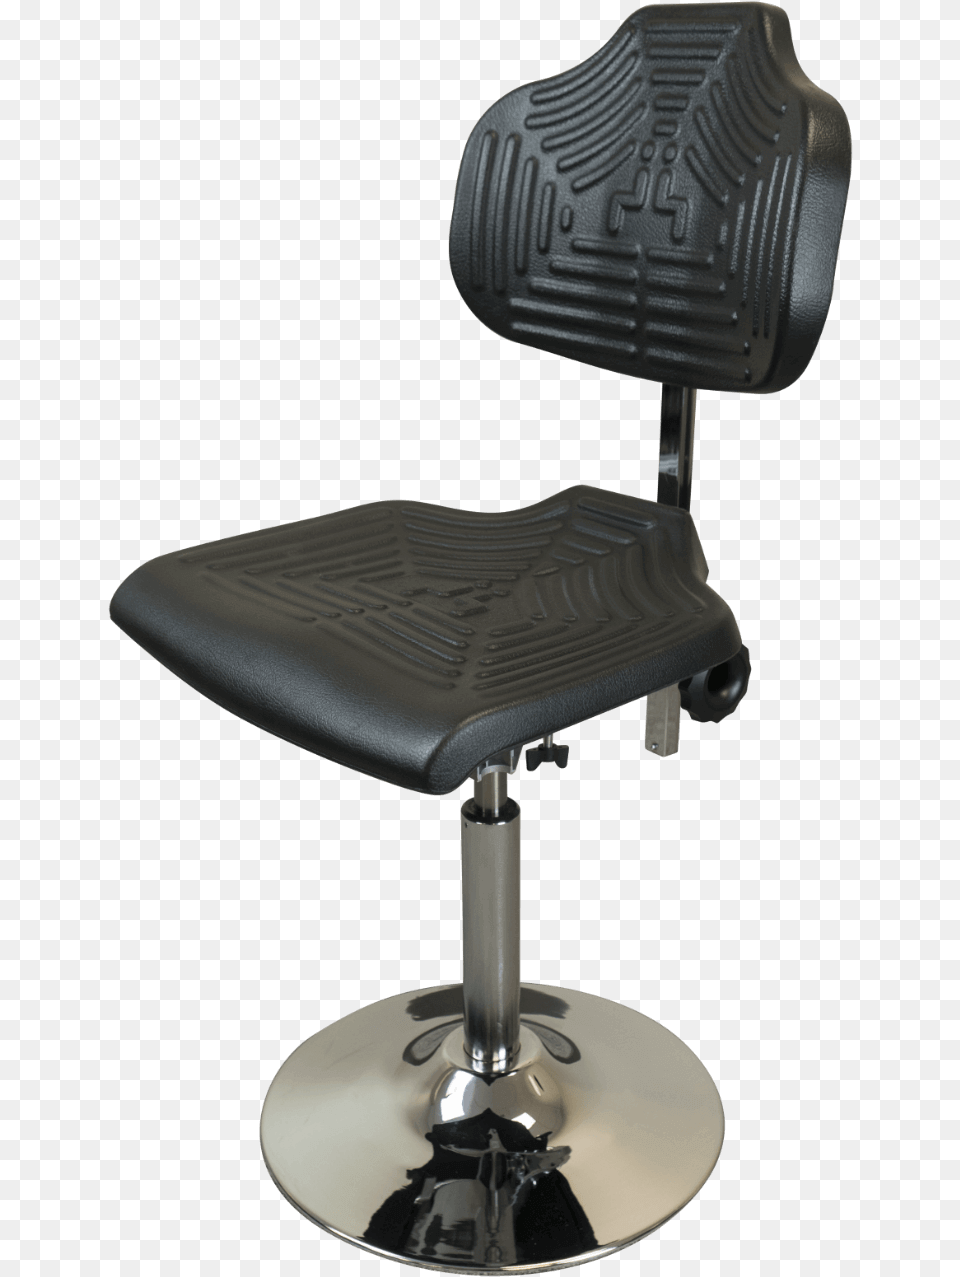 Imovr Tempo Treadtop Office Chair Chair, Cushion, Furniture, Home Decor Free Png Download